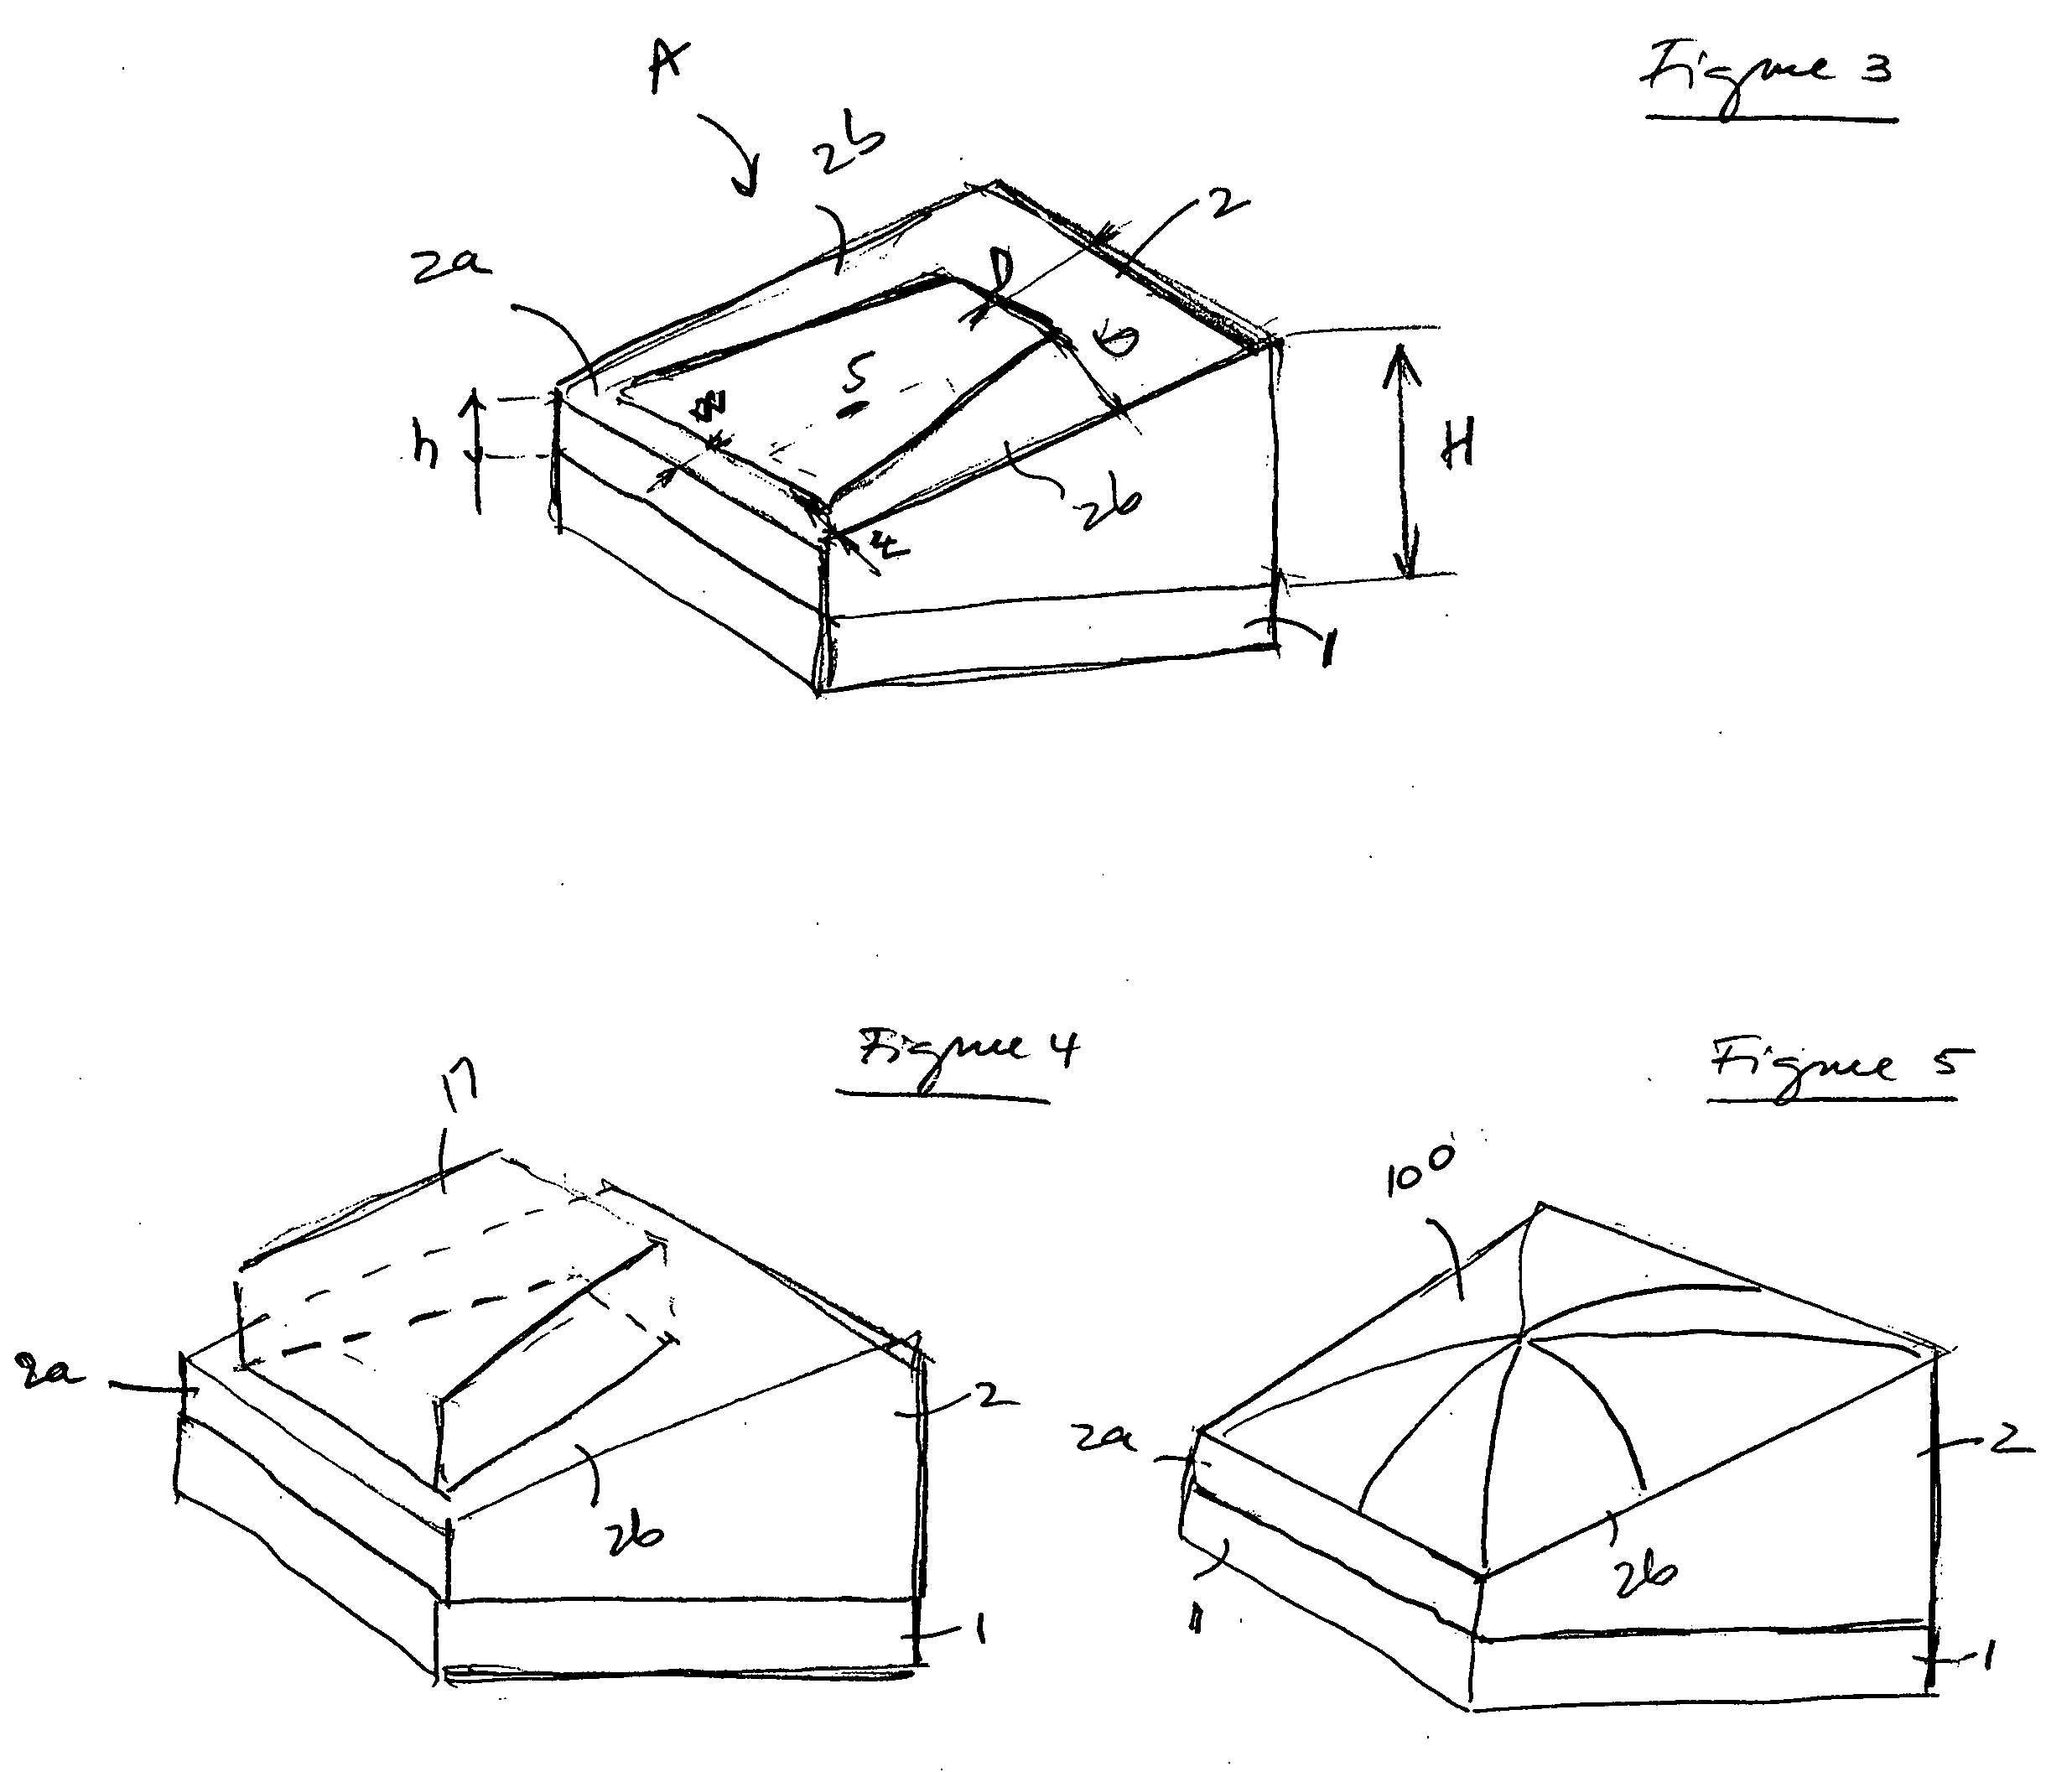 Apparatus and method for manufacturing tilted microlenses